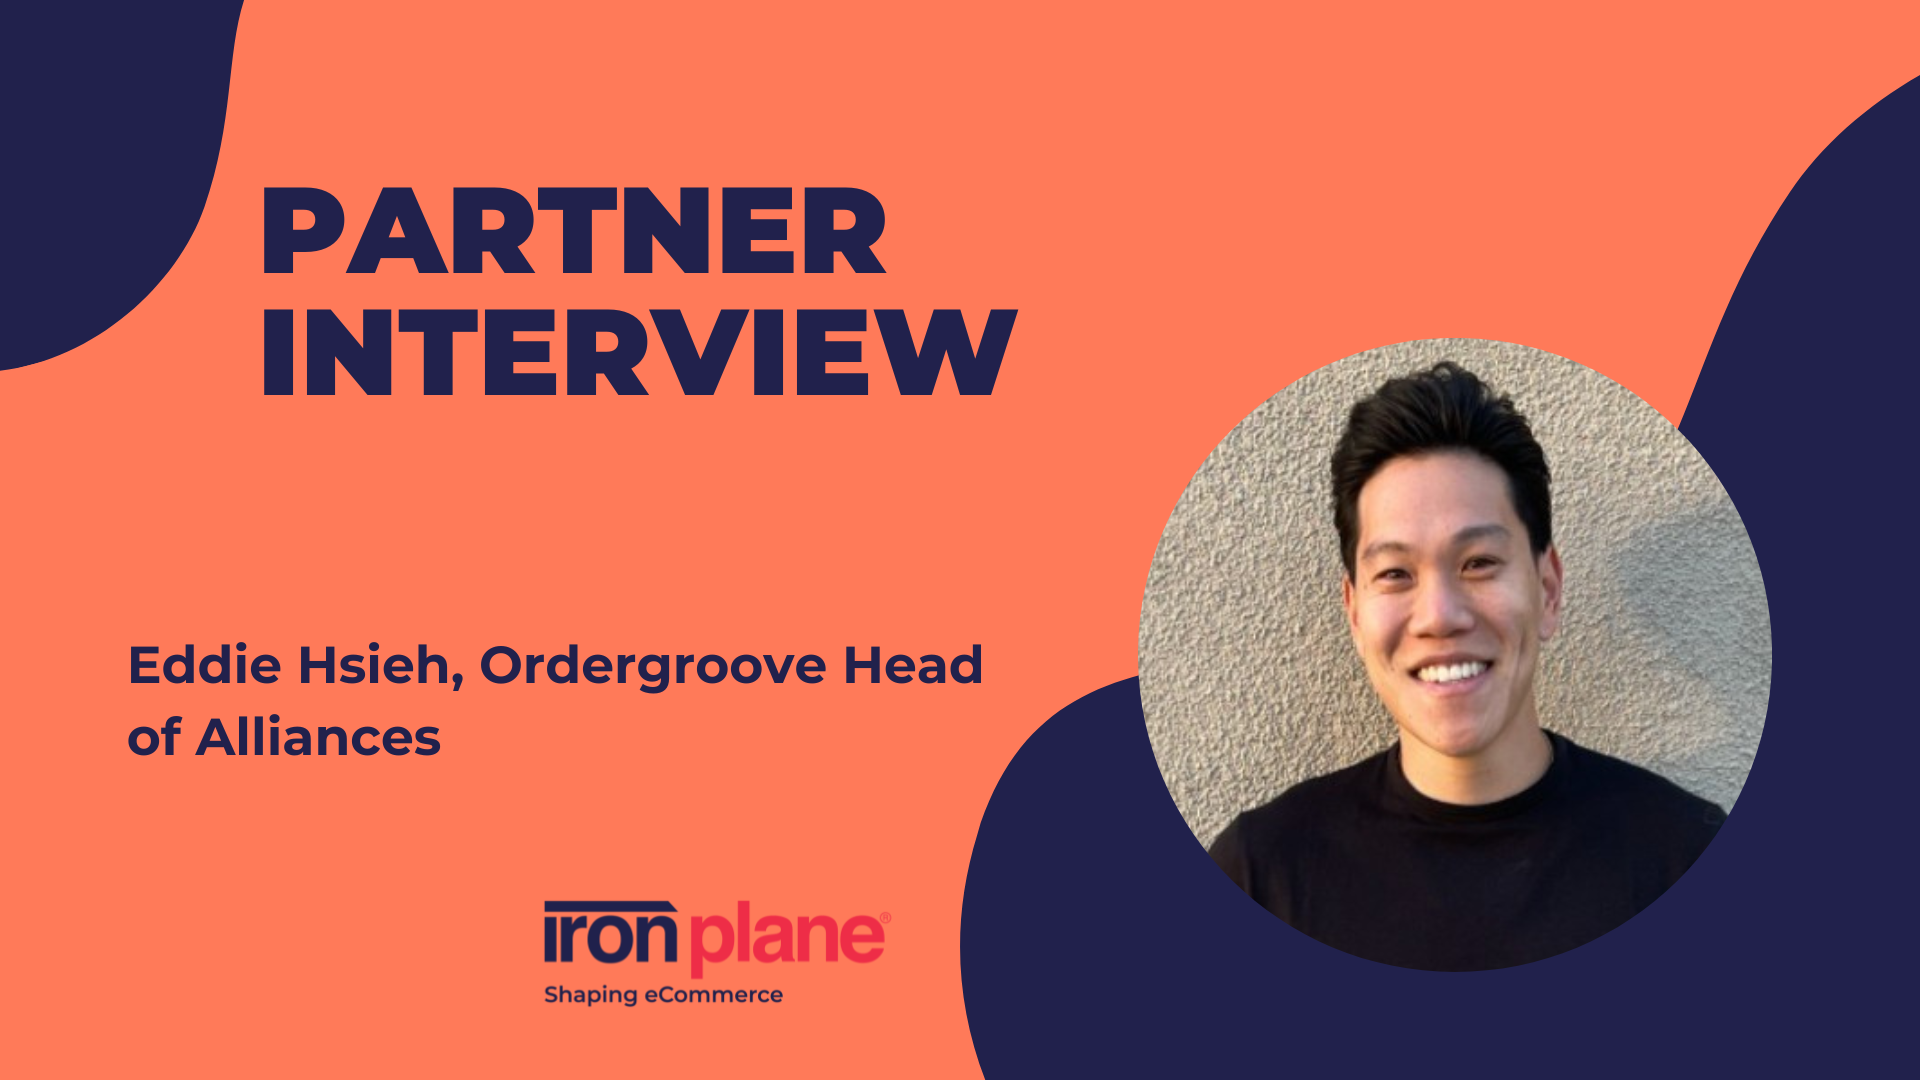 Shaping eCommerce with Eddie Hsieh, Ordergroove Head of Alliances